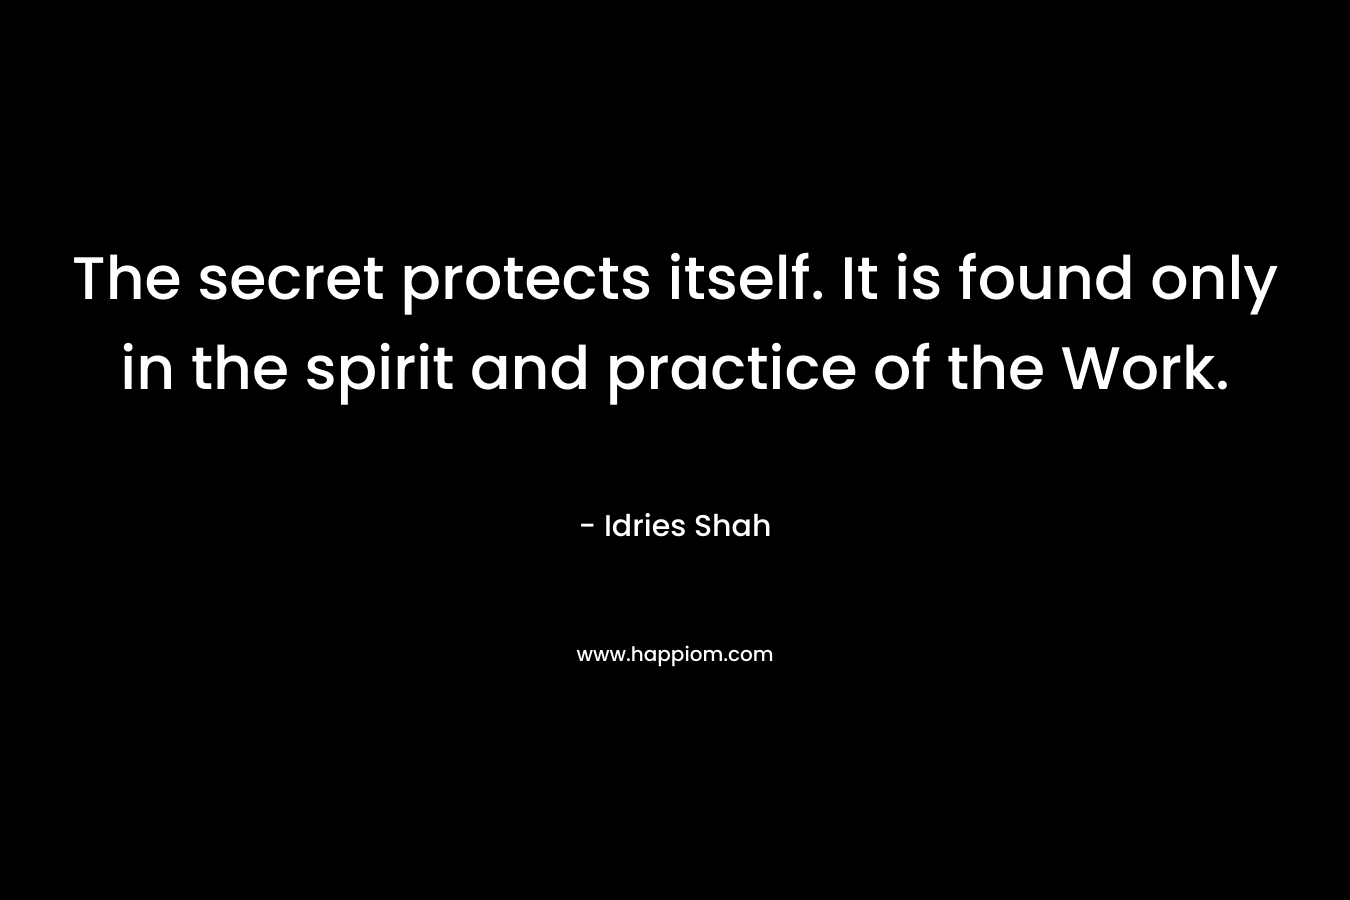 The secret protects itself. It is found only in the spirit and practice of the Work. – Idries Shah